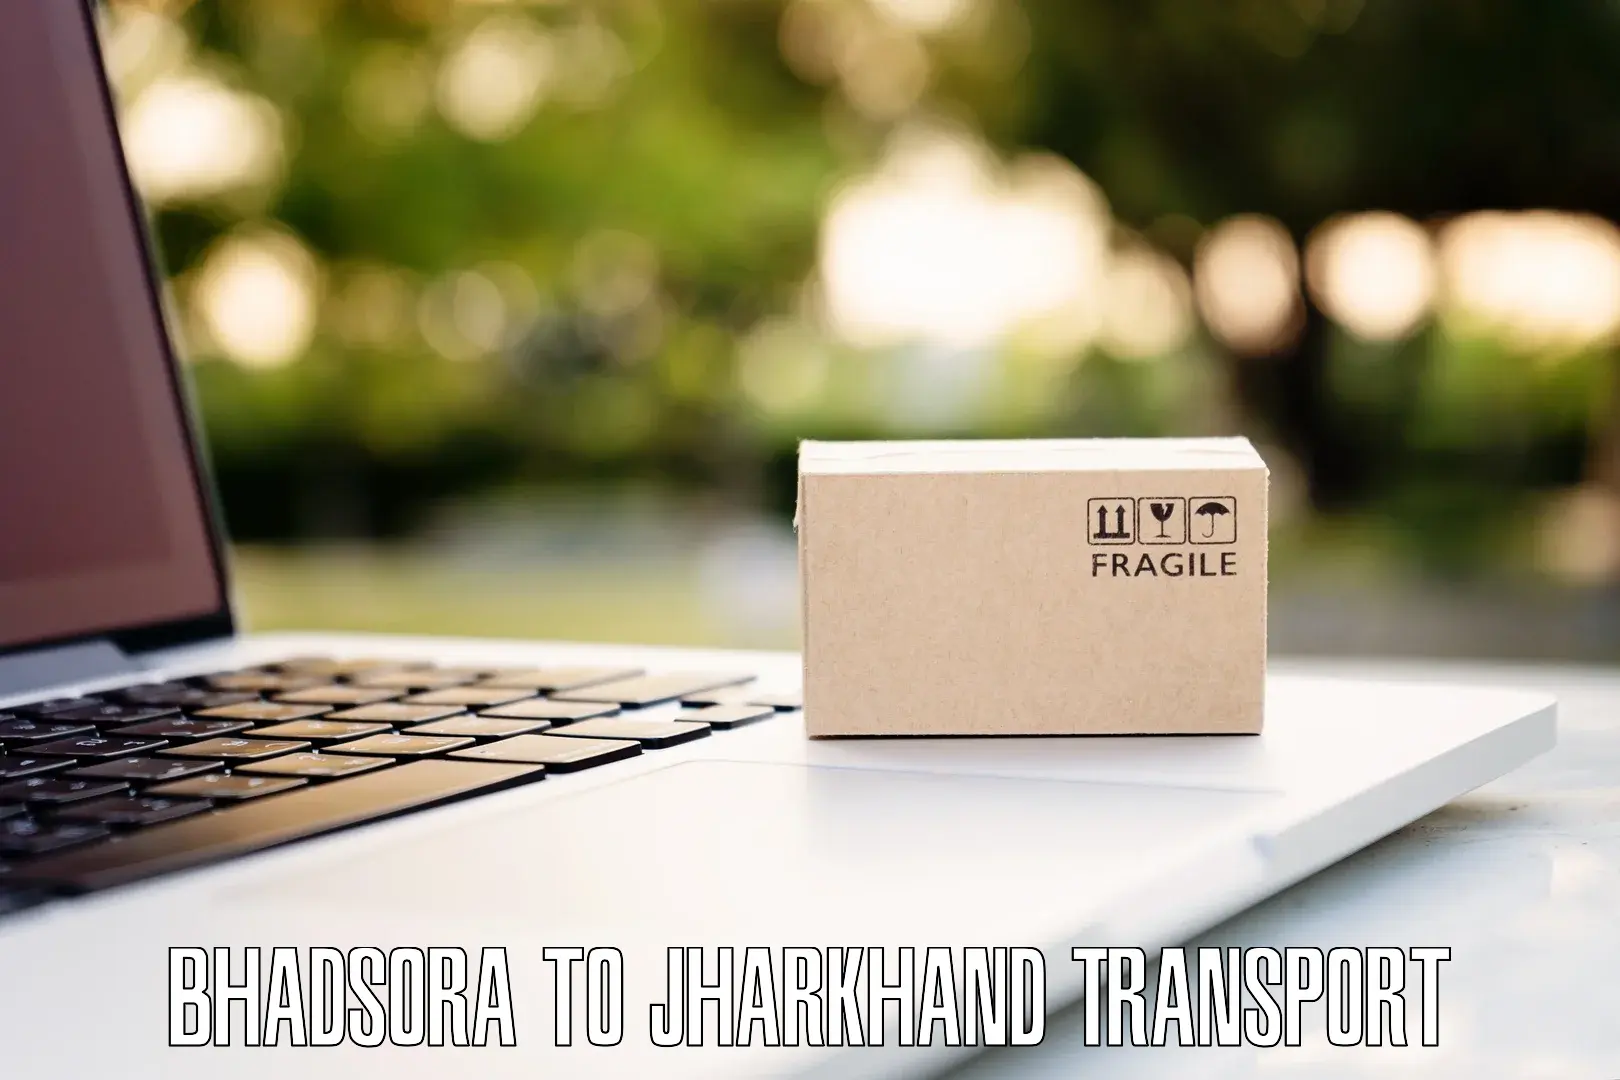 Delivery service Bhadsora to Jharkhand